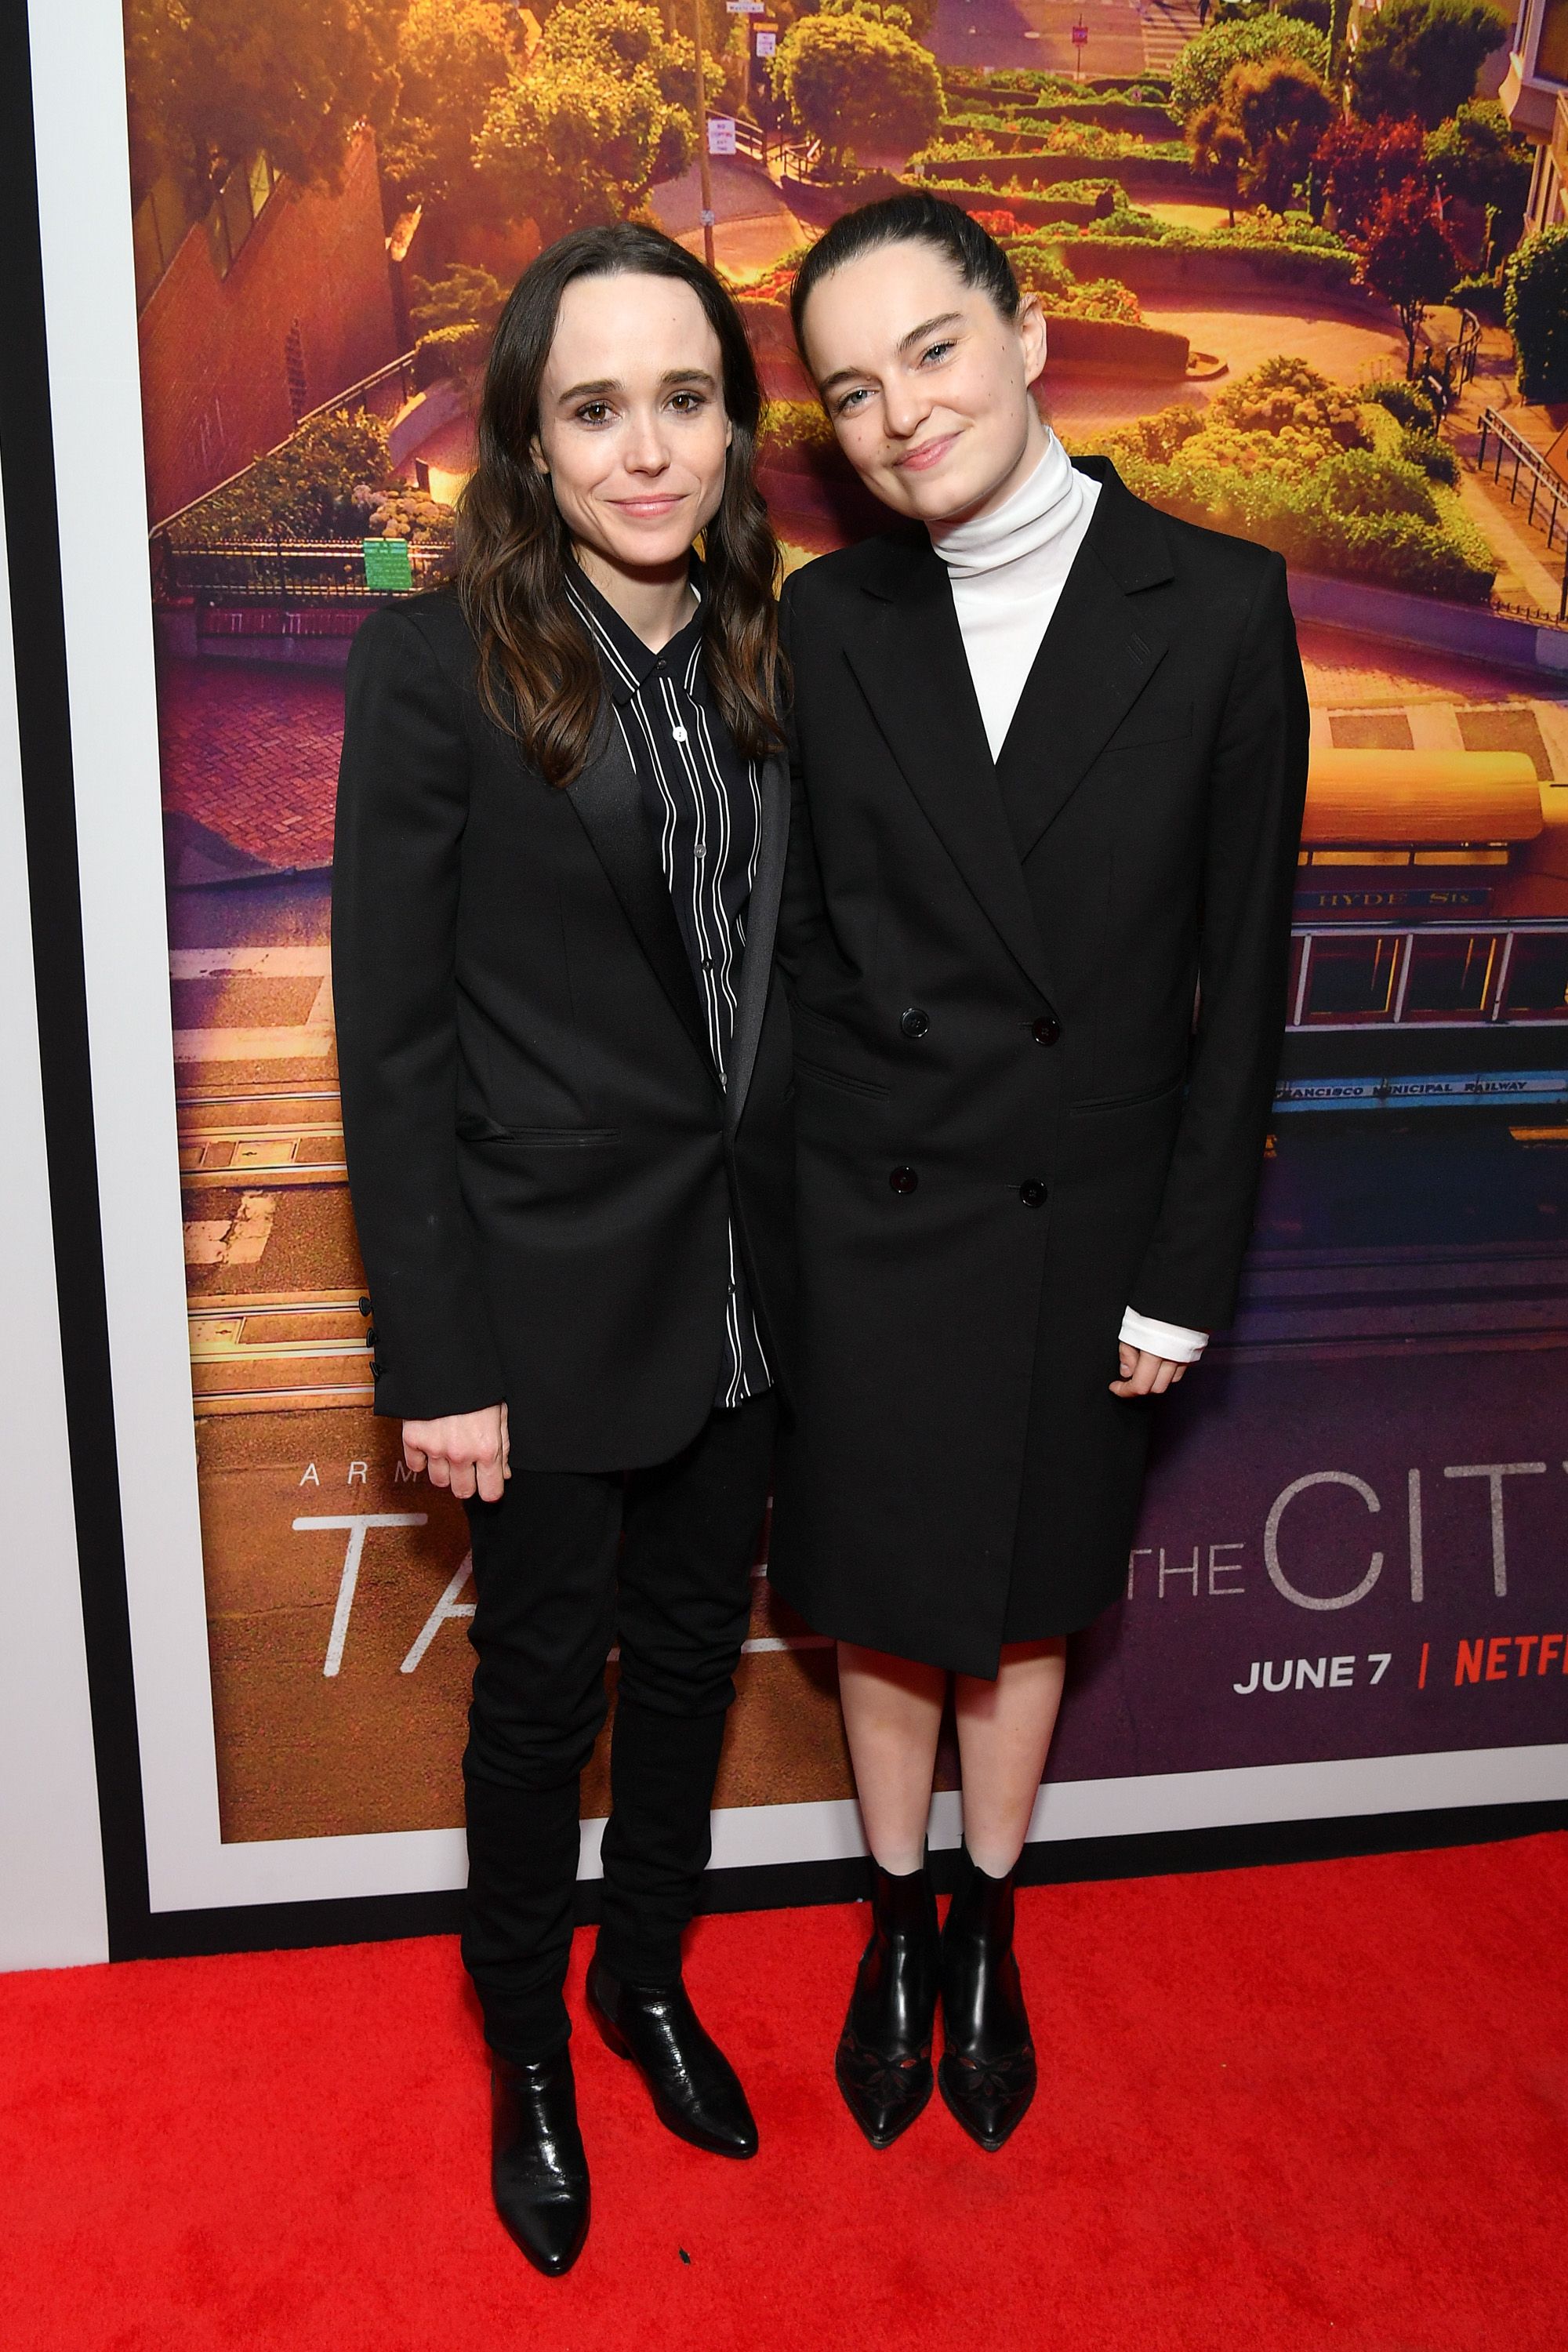 Ellen Page and Emma Portner at the "Tales of the City" New York premiere on June 03, 2019, in New York City | Photo: Dia Dipasupil/WireImage/Getty Images